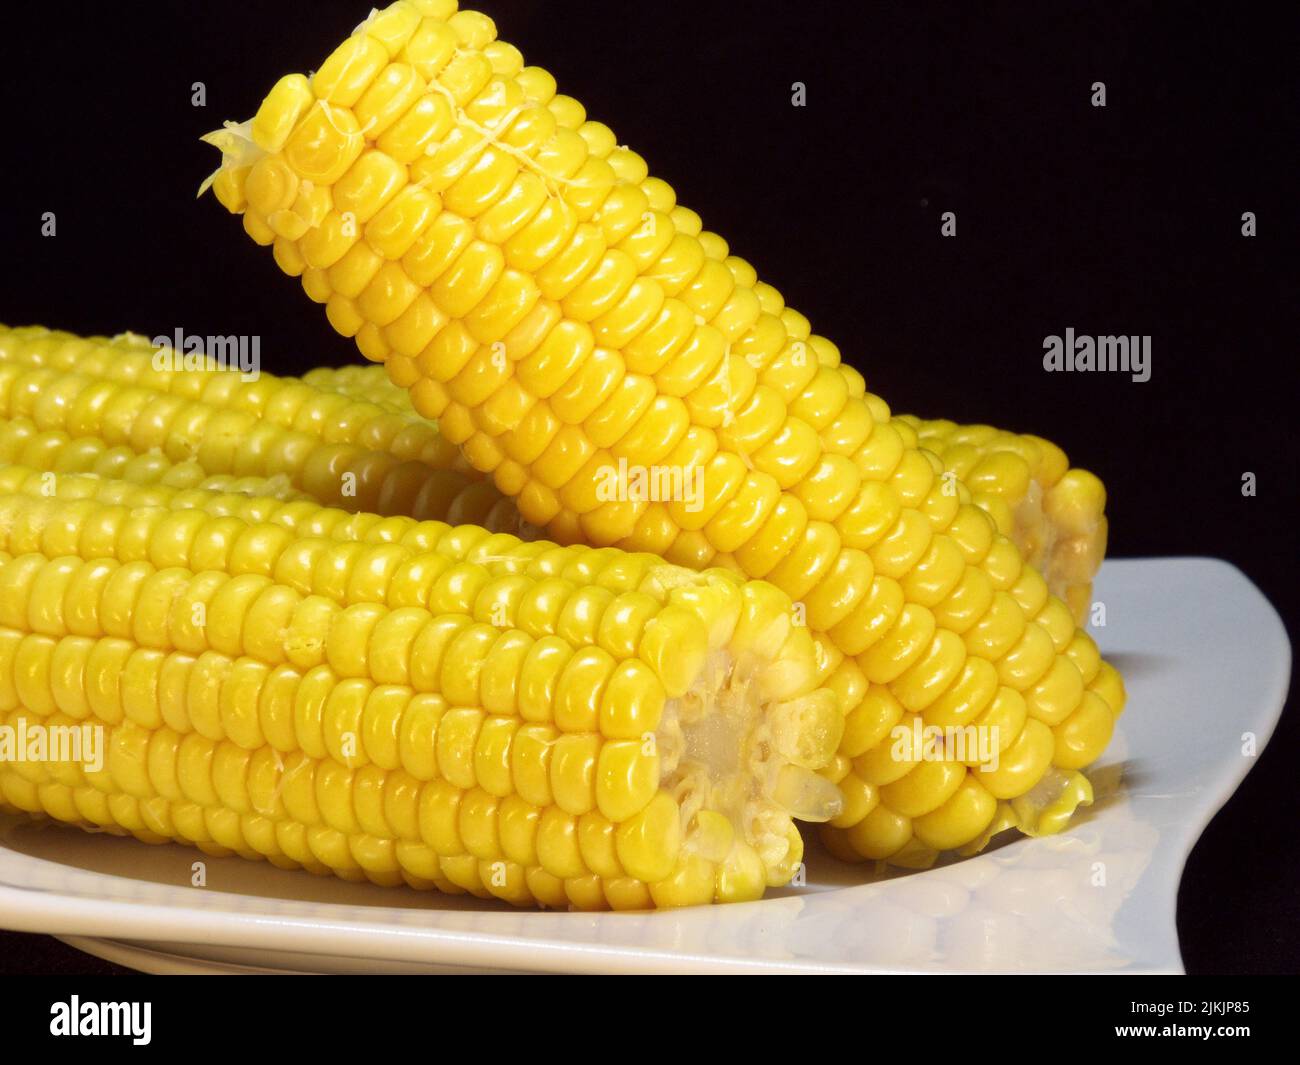 White plate on the 3 husked corn on the cob are Stock Photo